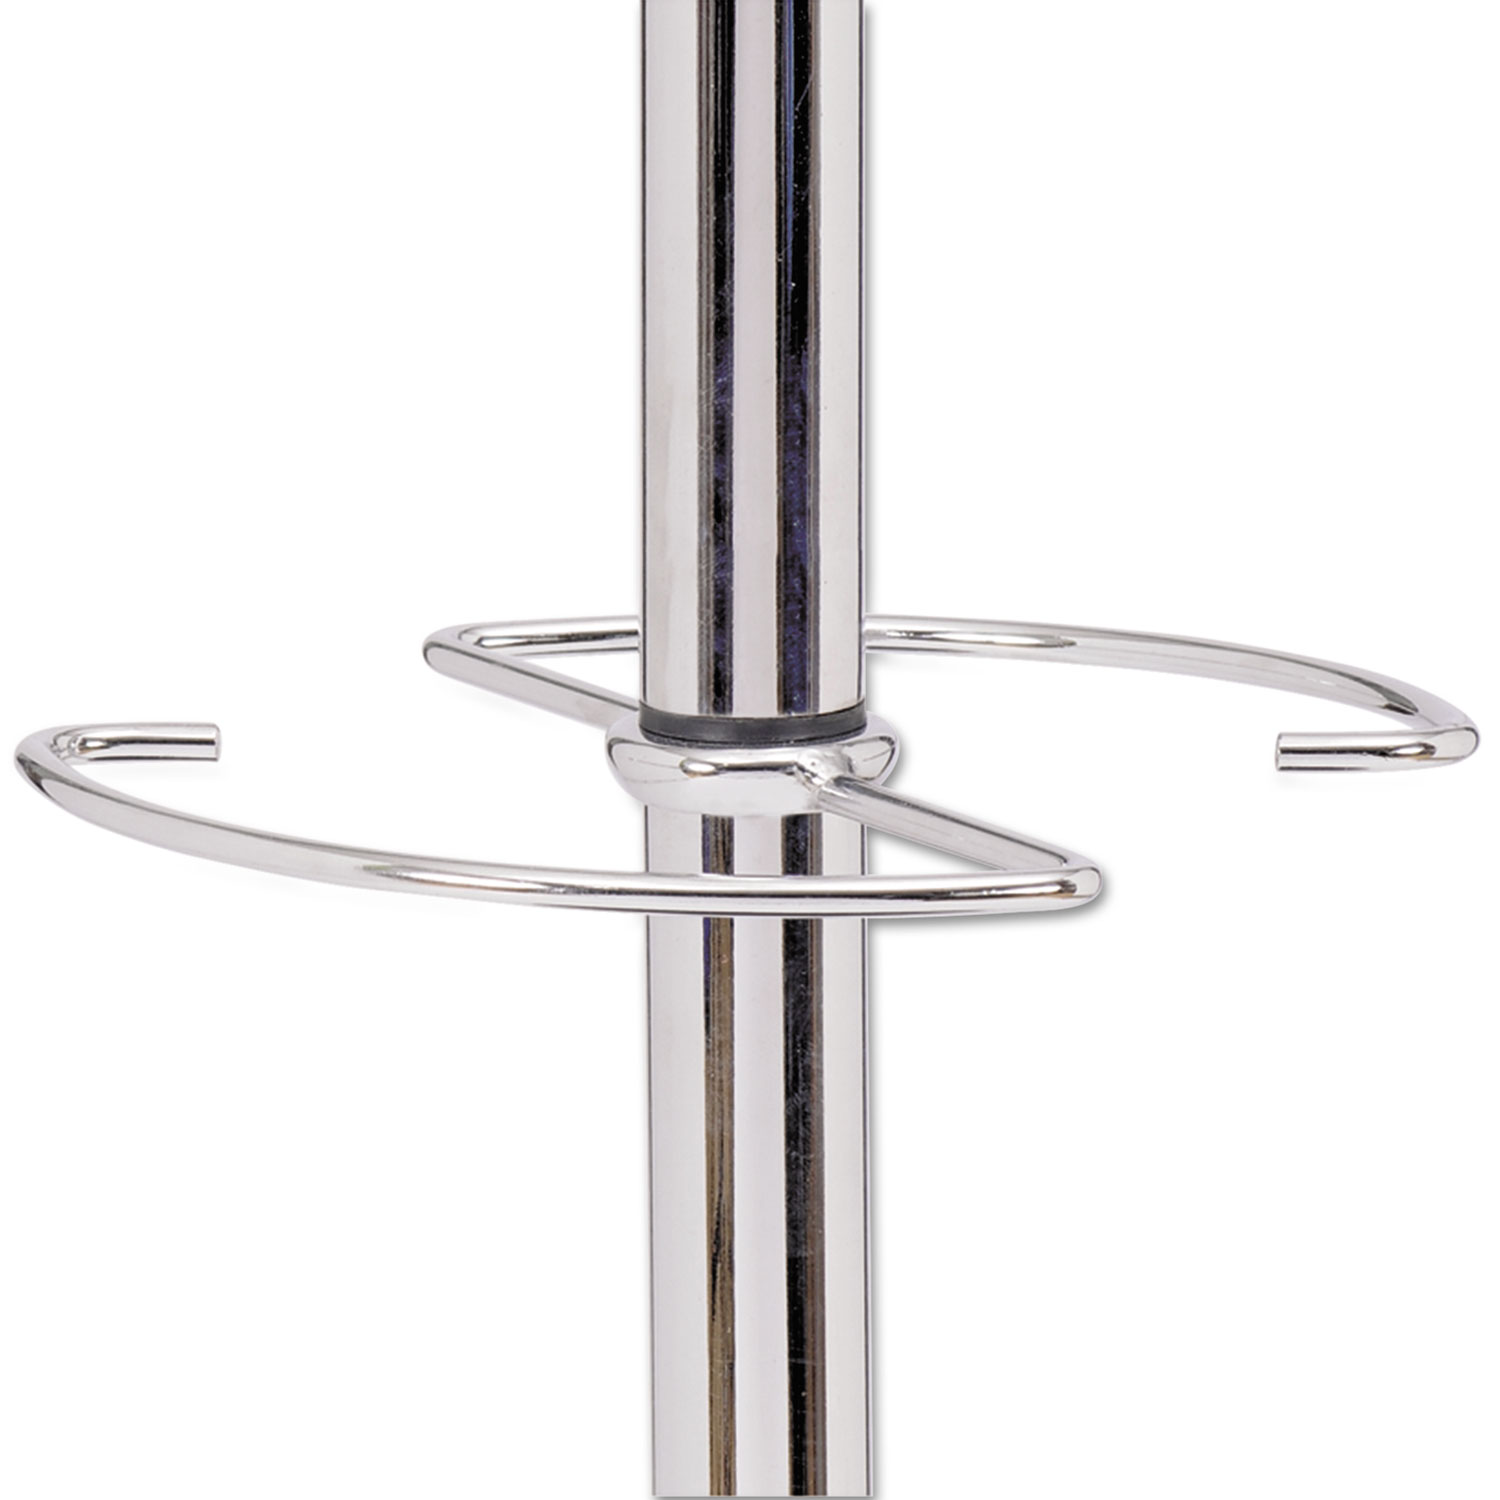 Festival Coat Stand with Umbrella Holder, Five Knobs, Chrome